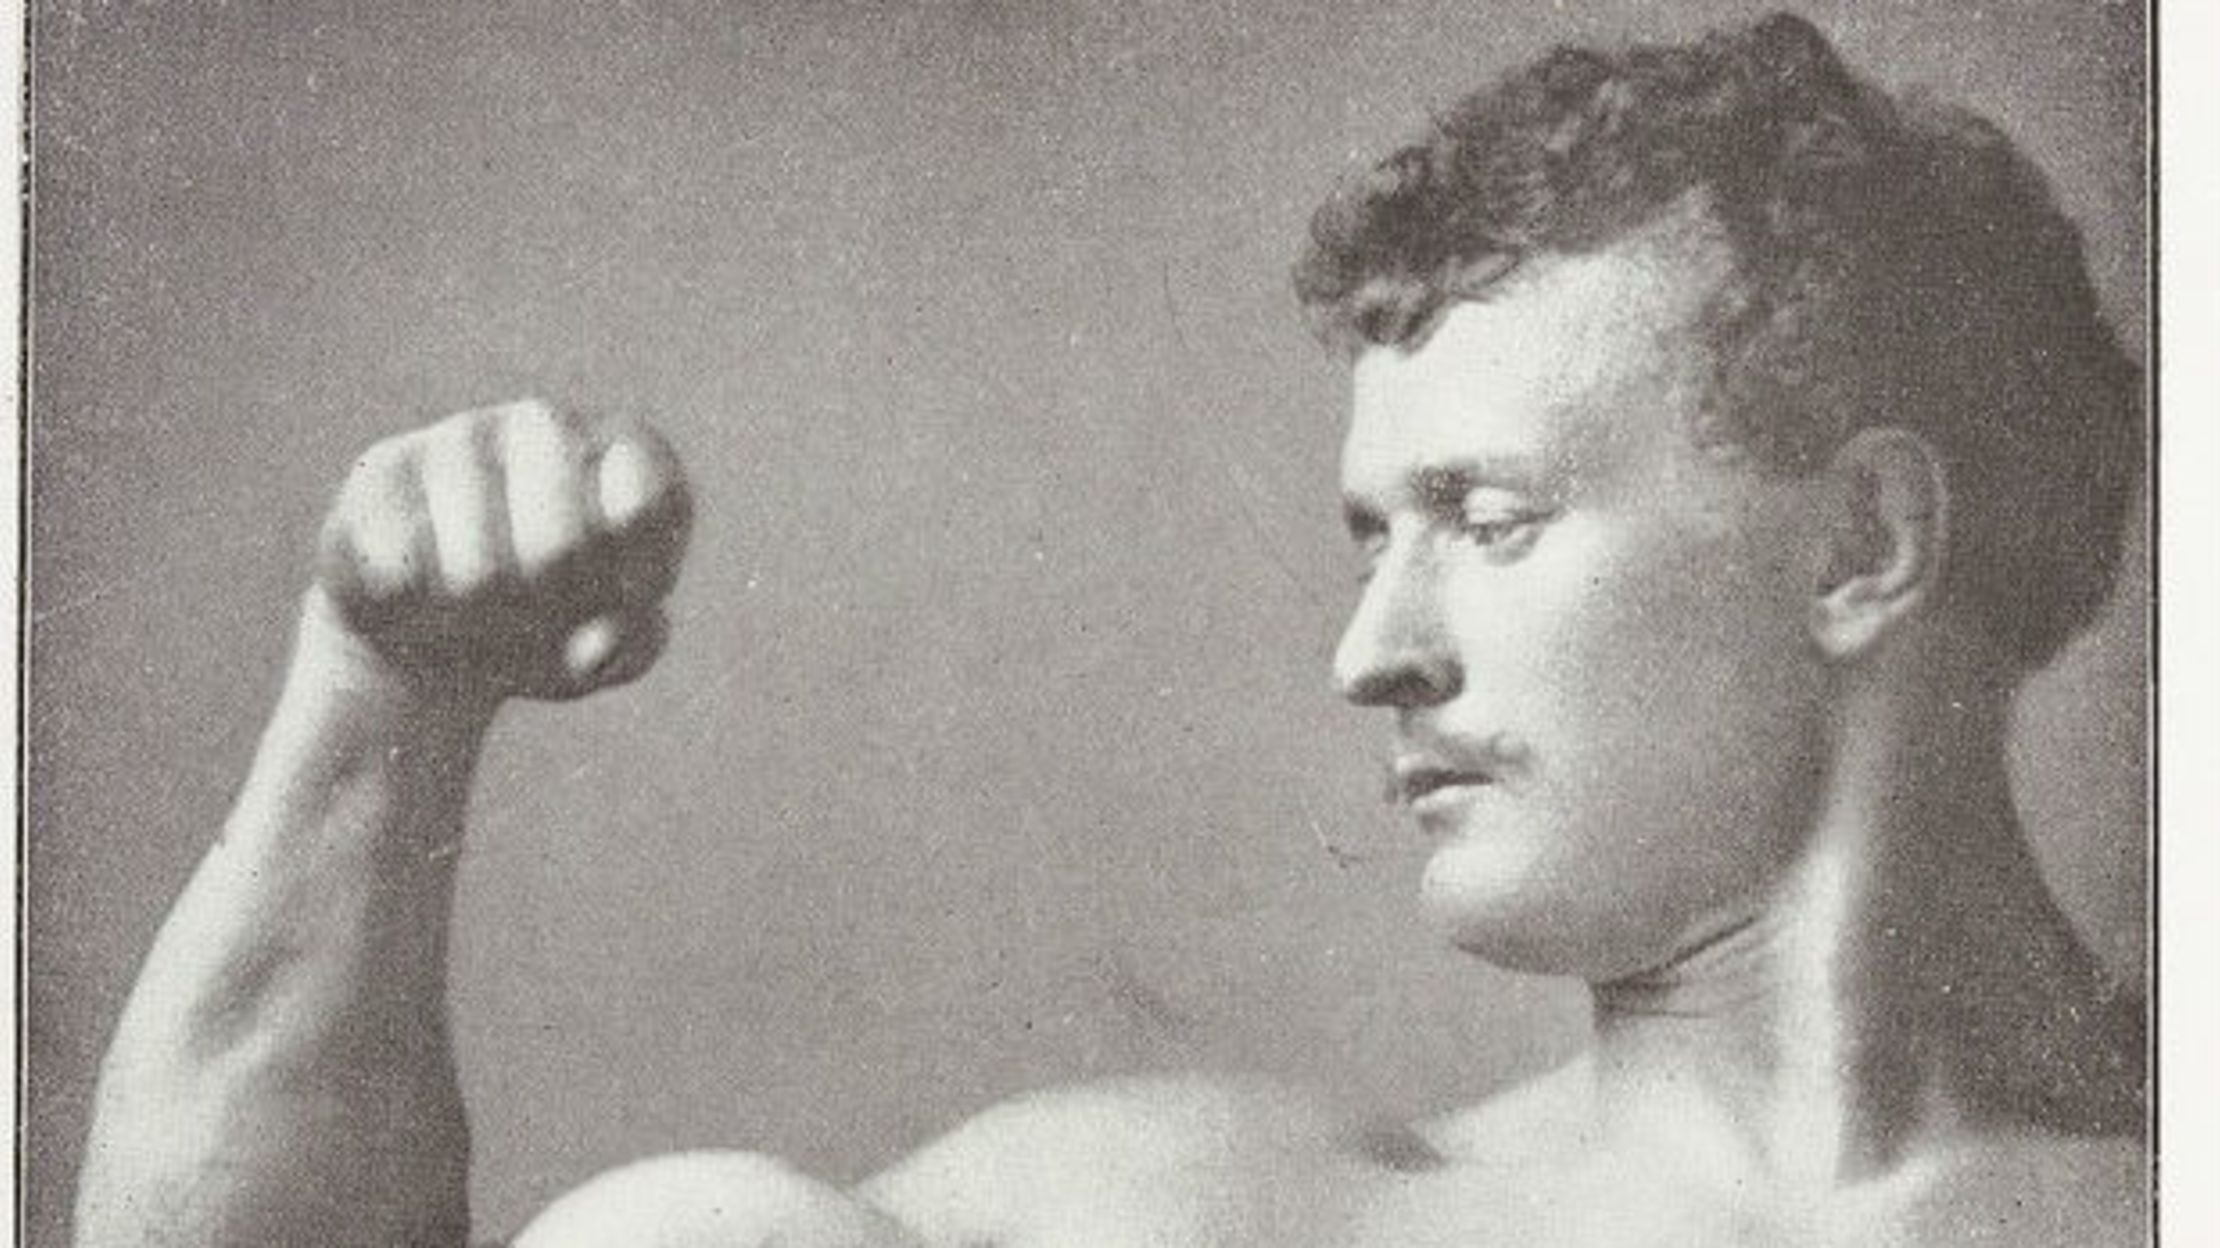 15 Fitness Tips From 1800s Bodybuilder Eugen Sandow That Are Still Images, Photos, Reviews